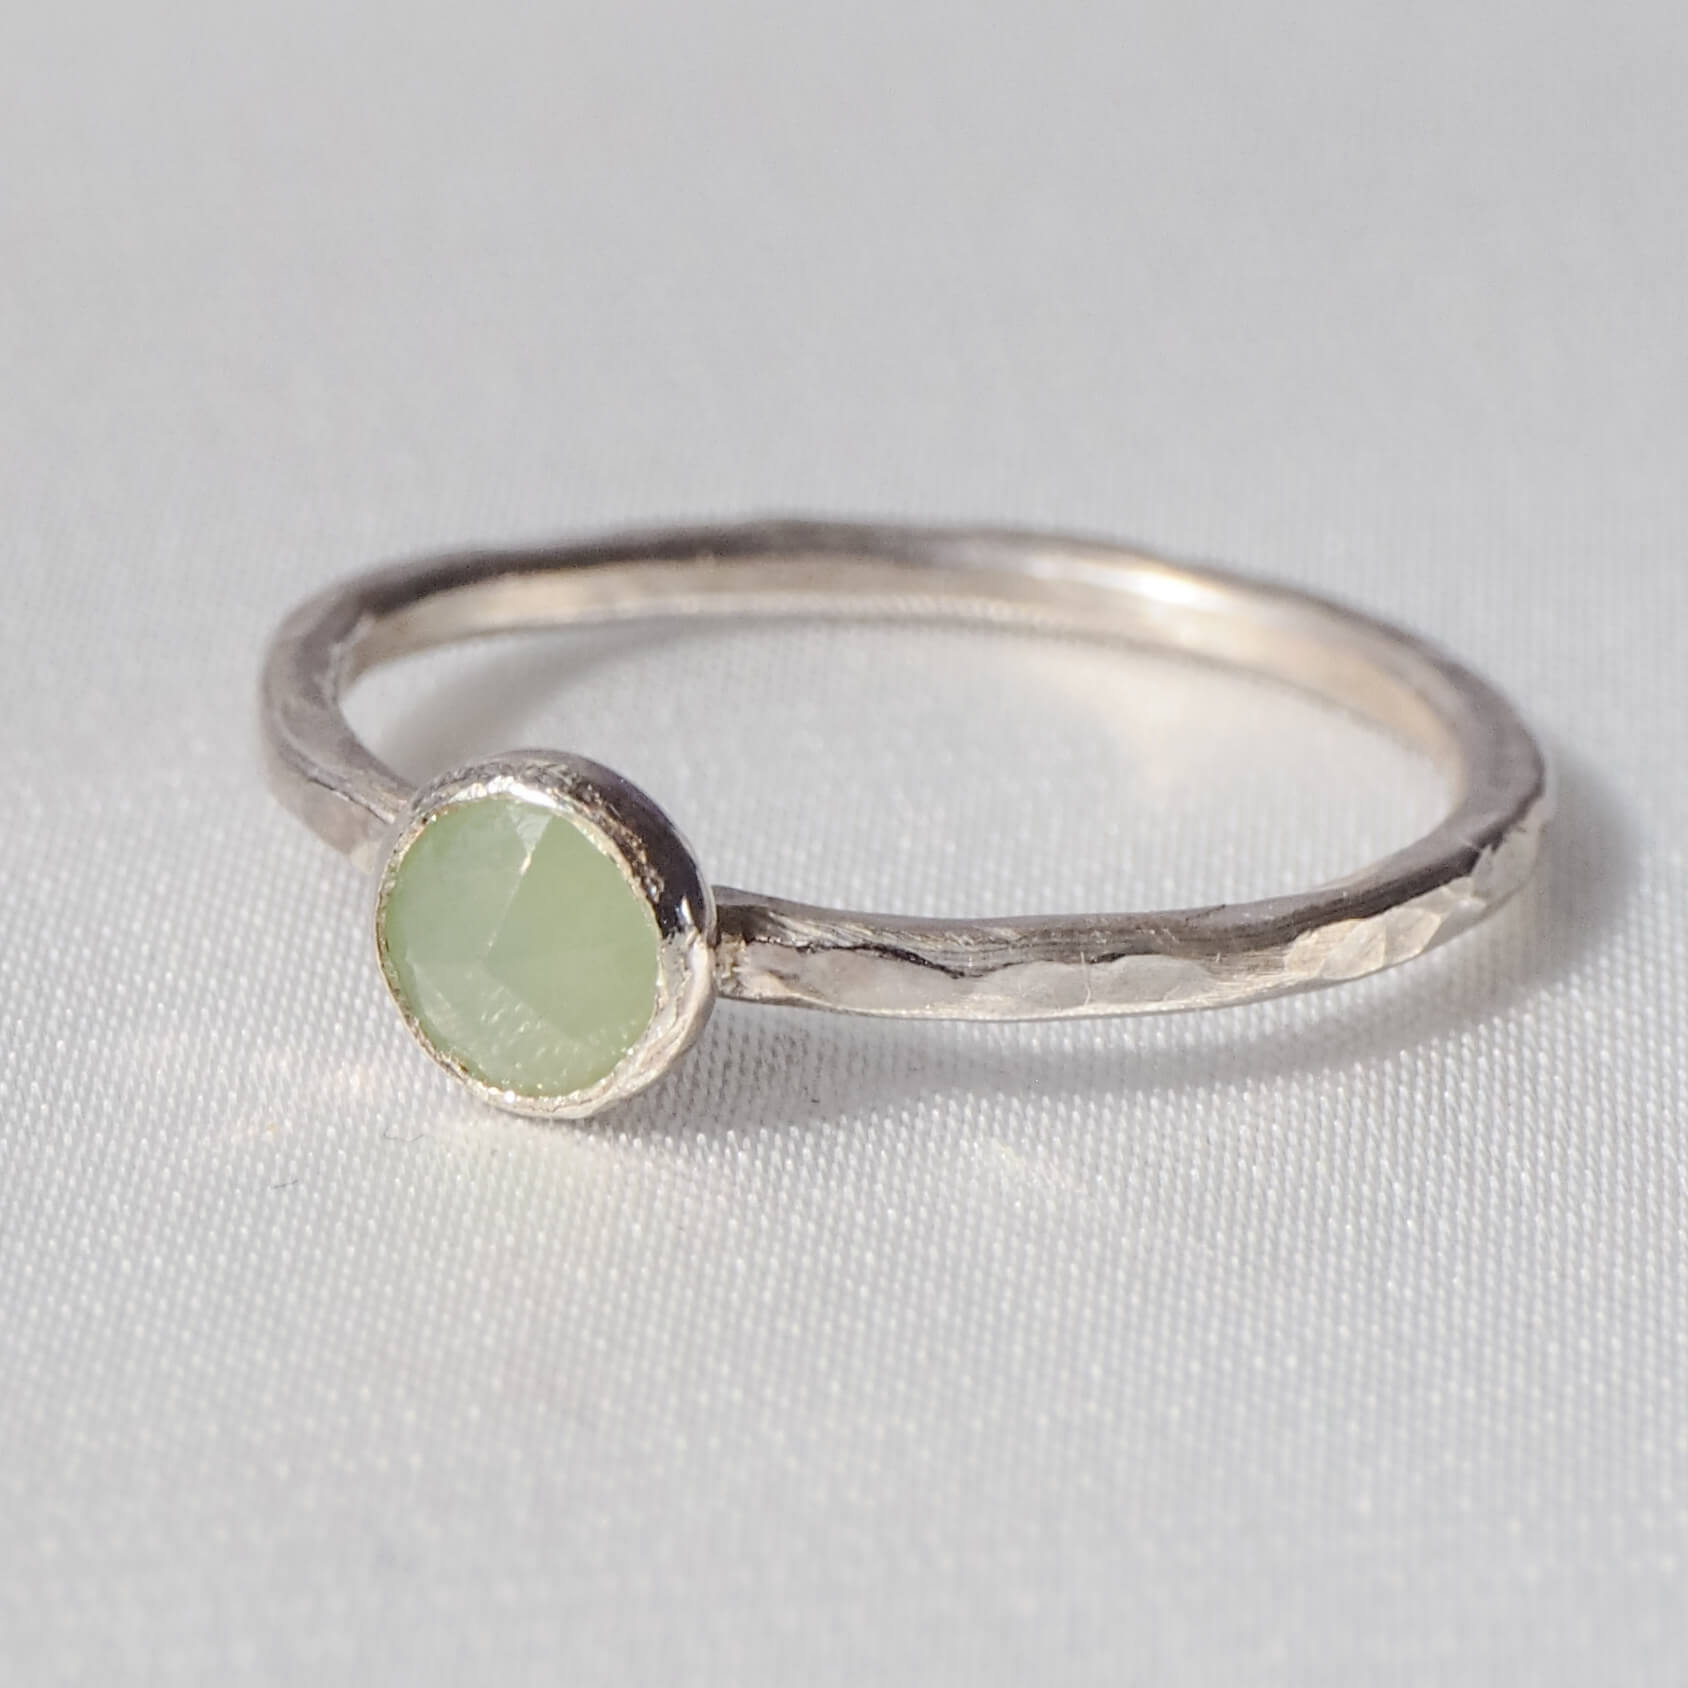 https://www.lunarmothjewellery.com/collections/handmade-stirling-silver-stacking-rings